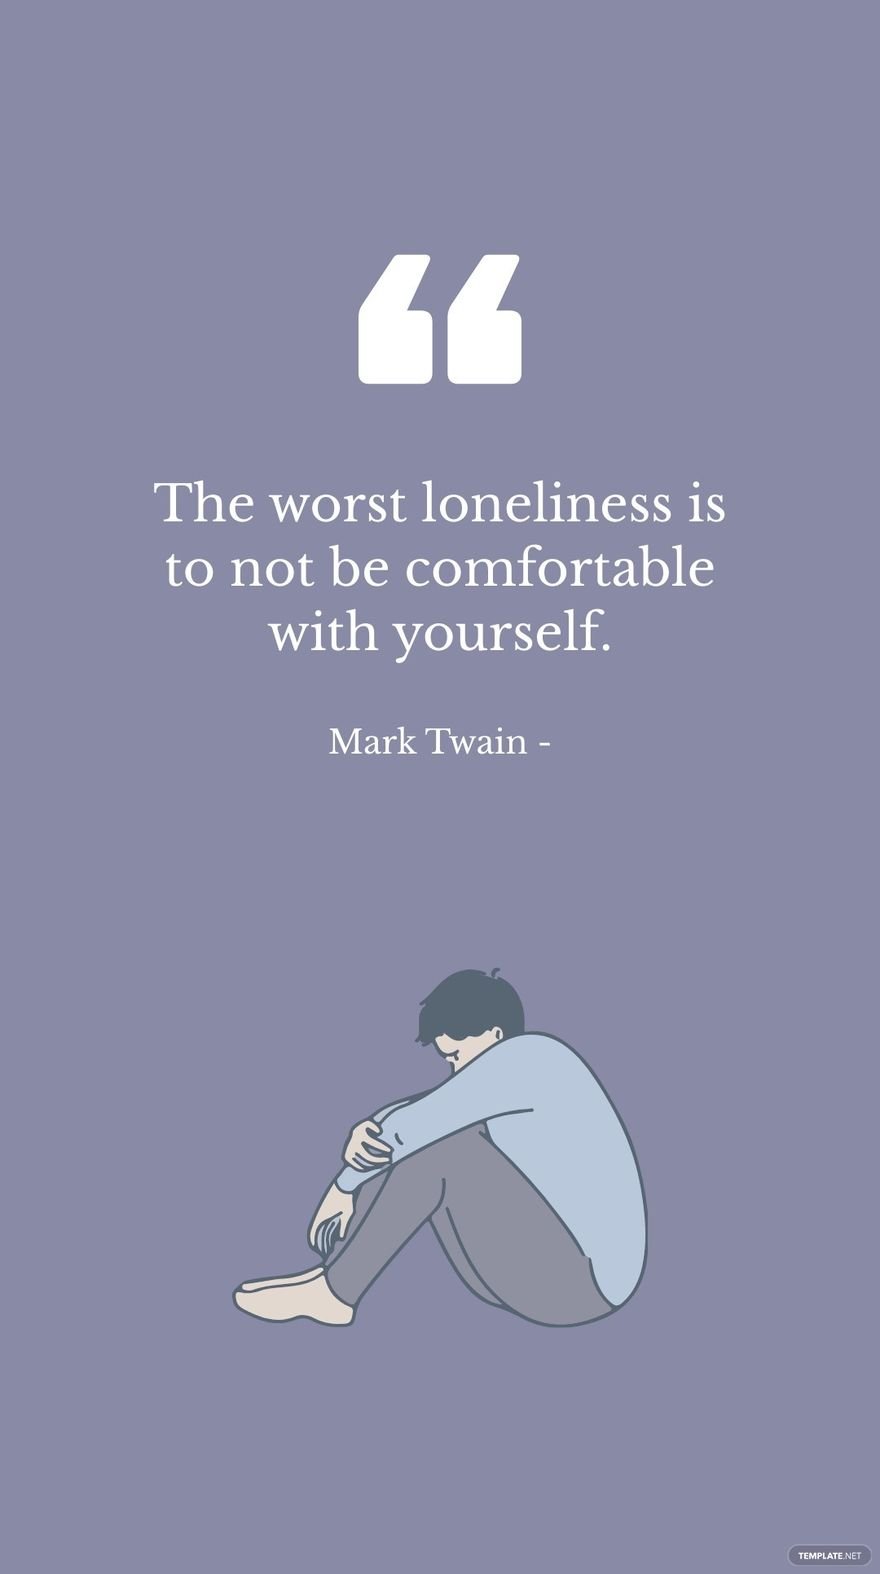 Mark Twain - The worst loneliness is to not be comfortable with yourself. in JPG